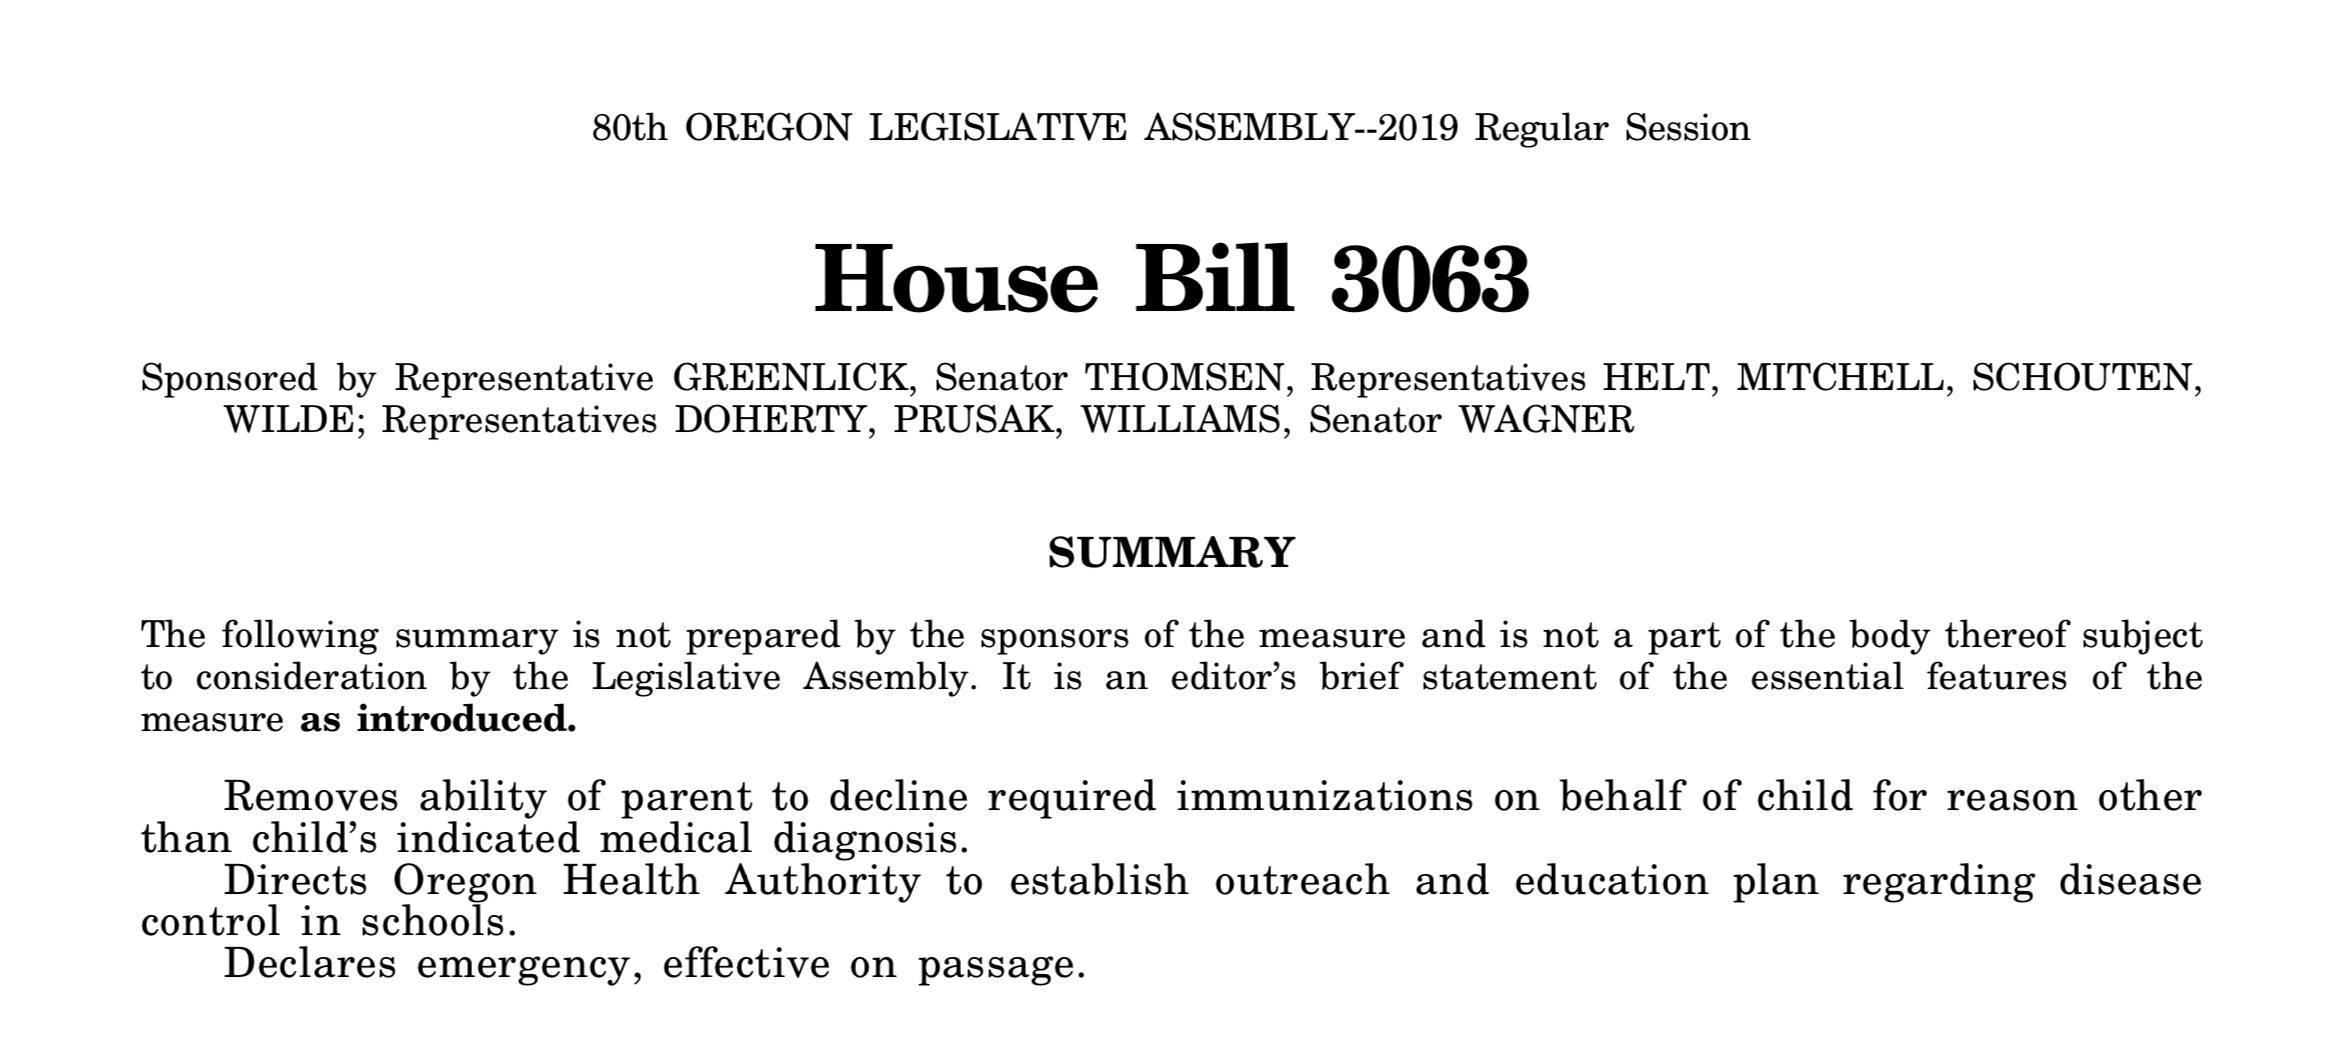 ATTENTION: Oregon’s meet up this Thursday for fast tracked bill concerning medical freedom